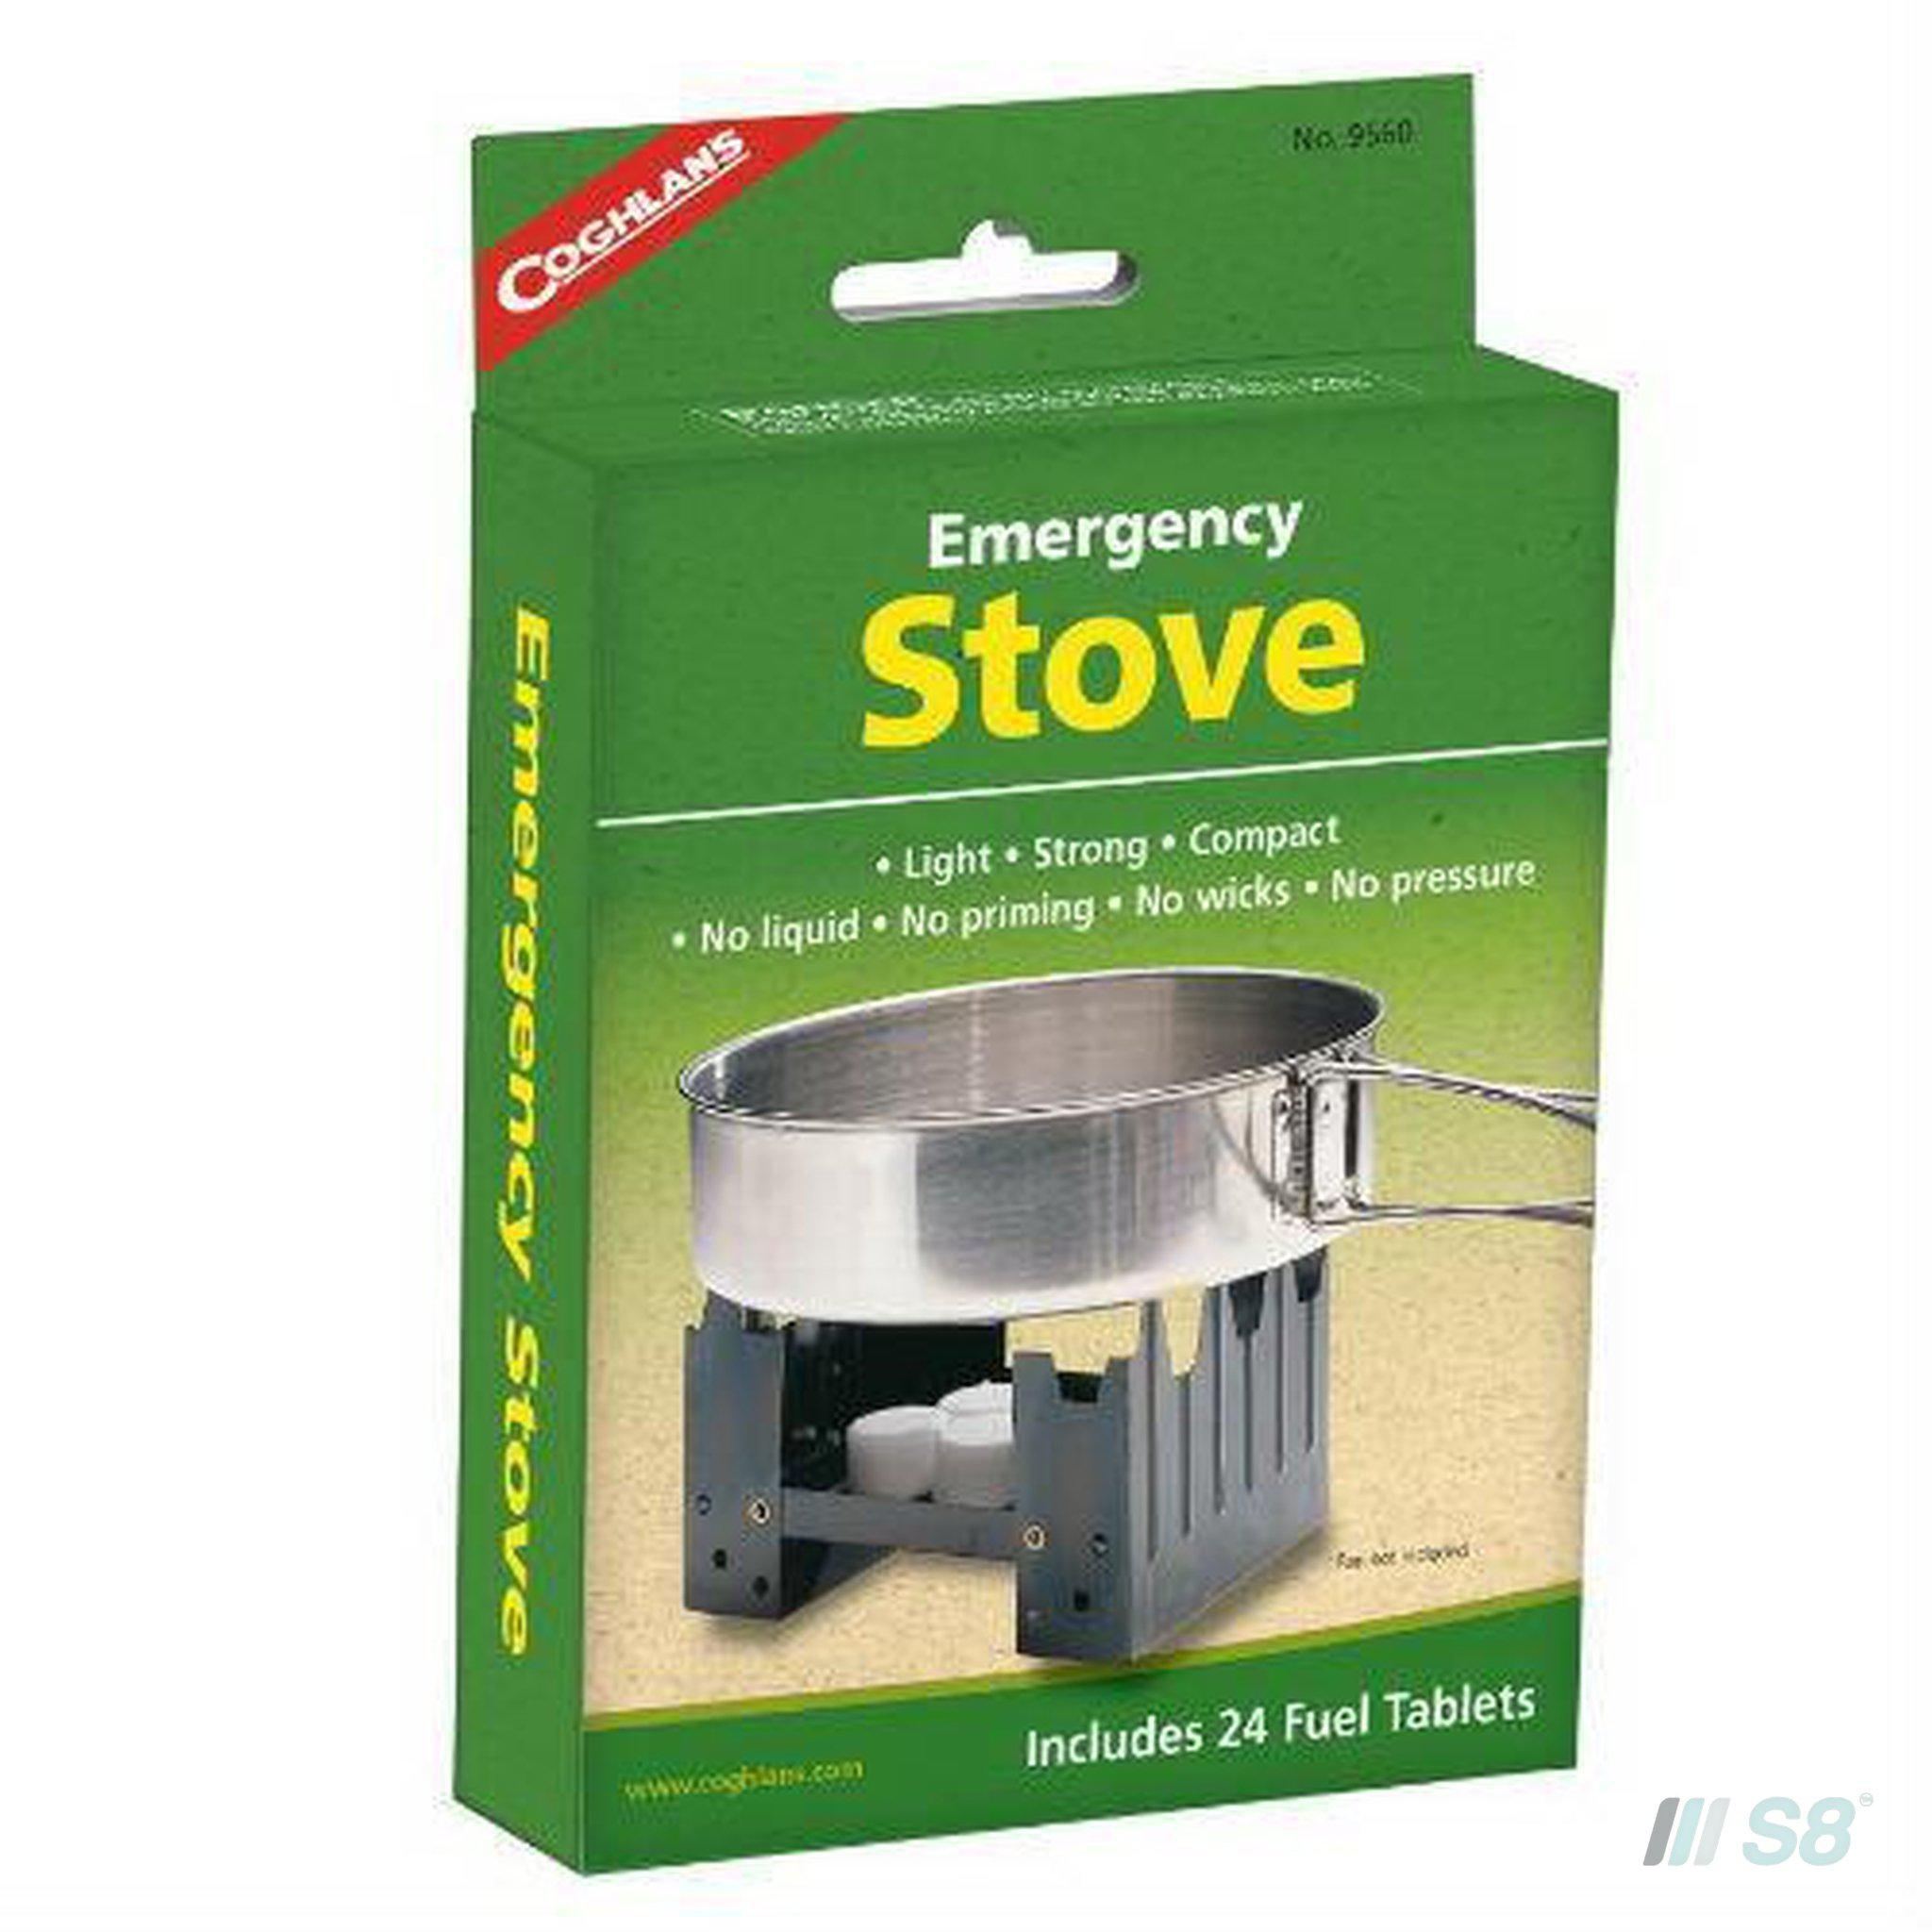 Coghlans EMERGENCY STOVE-WILDO-S8 Products Group